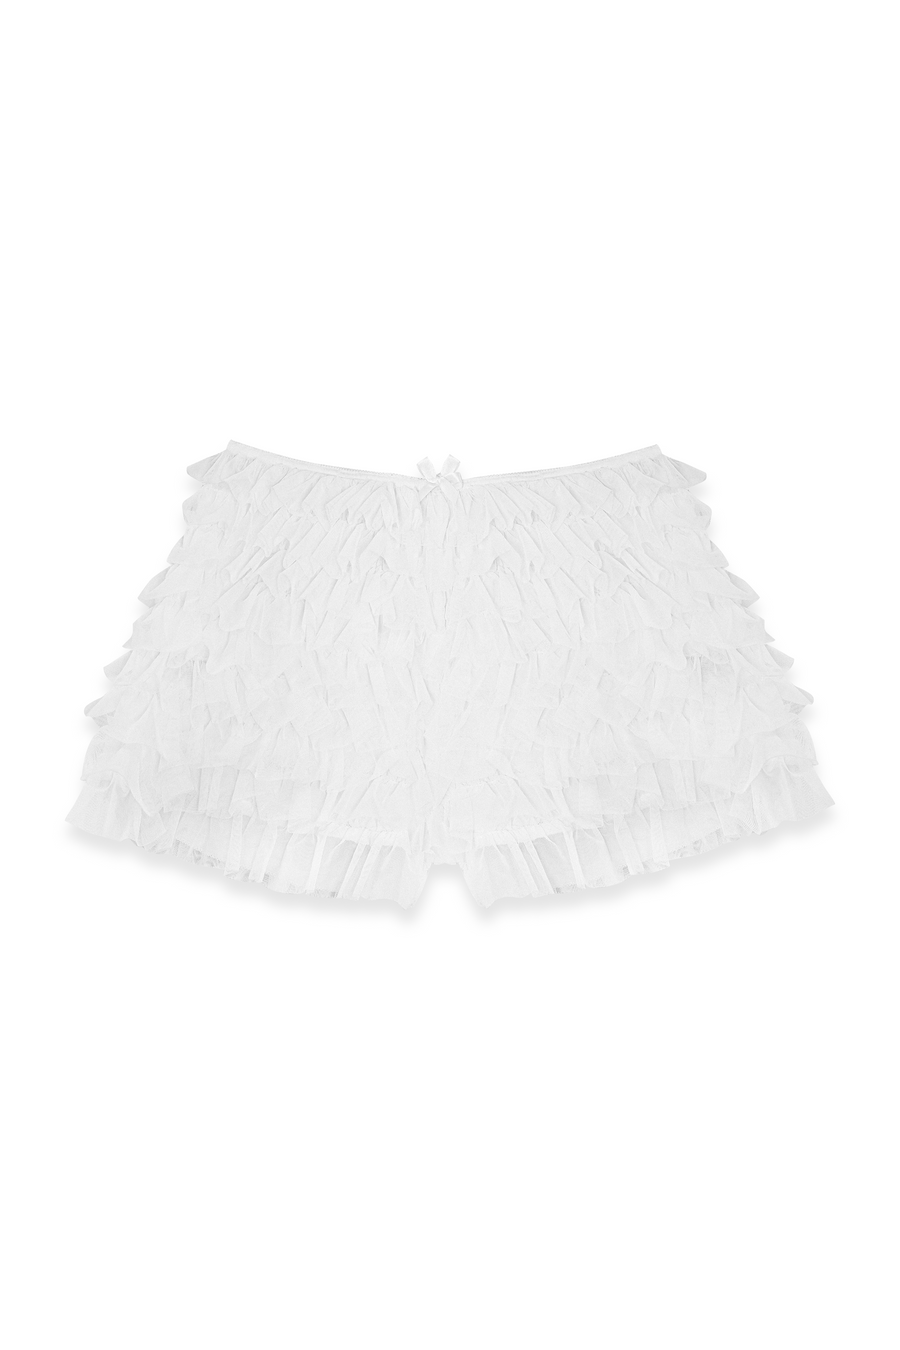 Dilly Frill Shorts in White